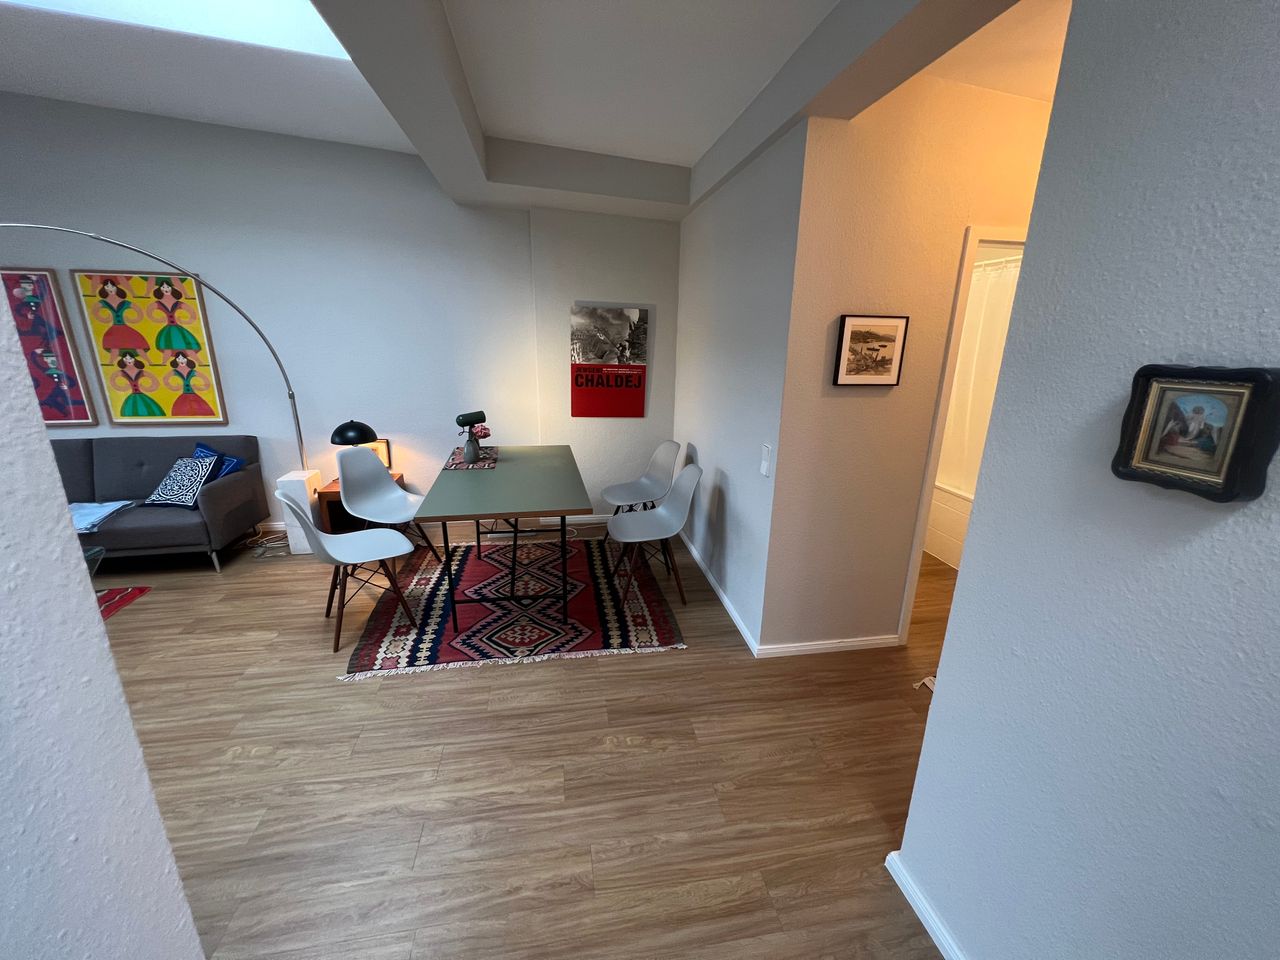 Stylish and cozy flat with balcony and wonderful city view, excellent location, quiet and bright. Prenzlauer Berg